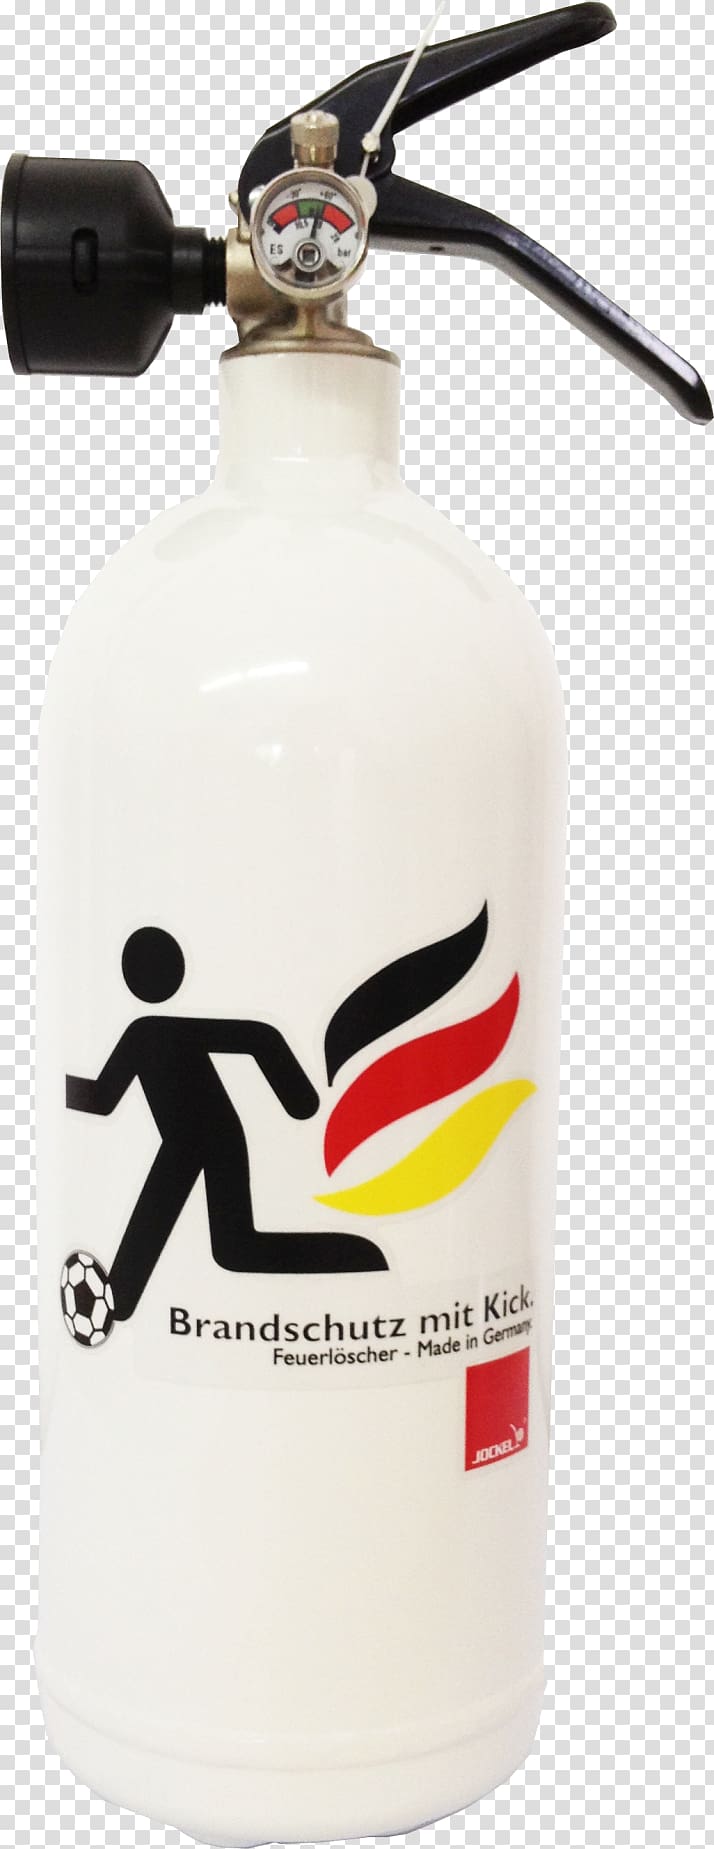 PlayStation Fire Extinguishers Fire protection Bottle, Playstation transparent background PNG clipart